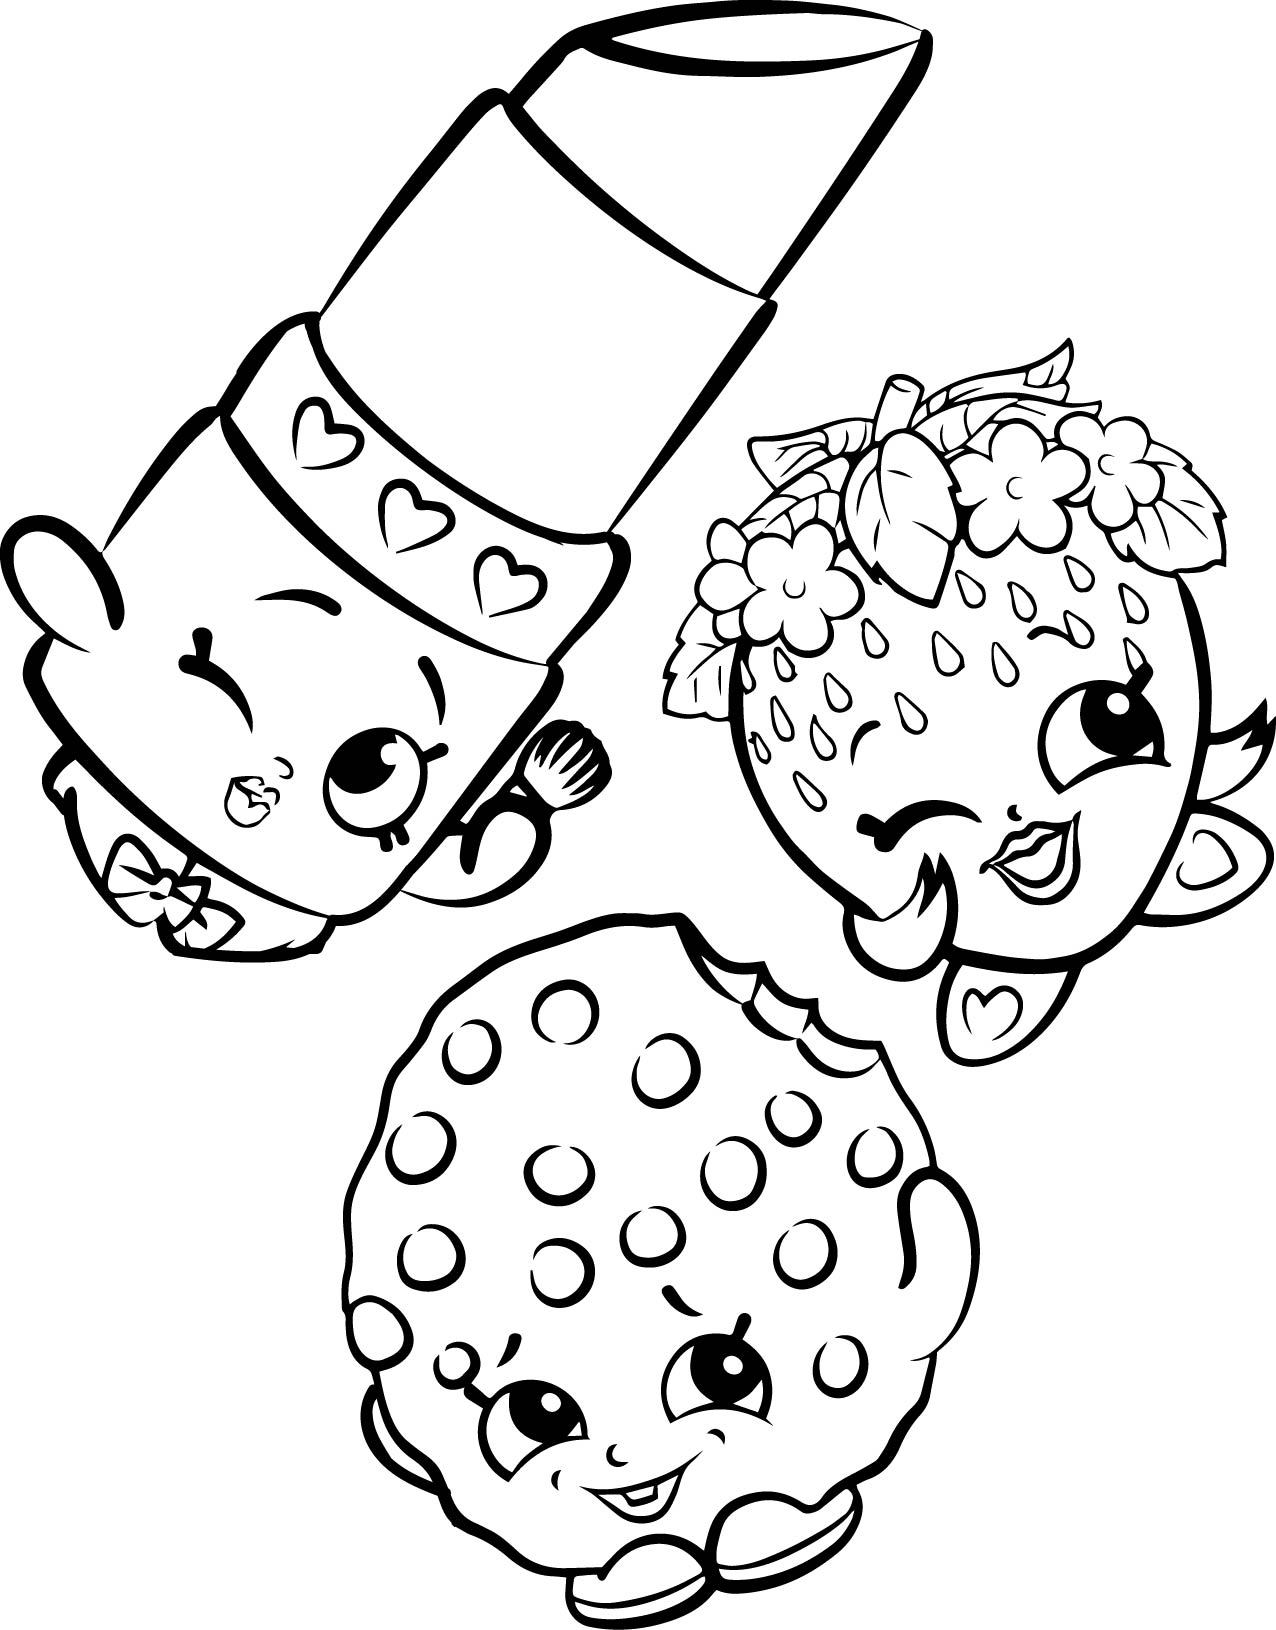 Shopkins Coloring Pages Free Printable 1